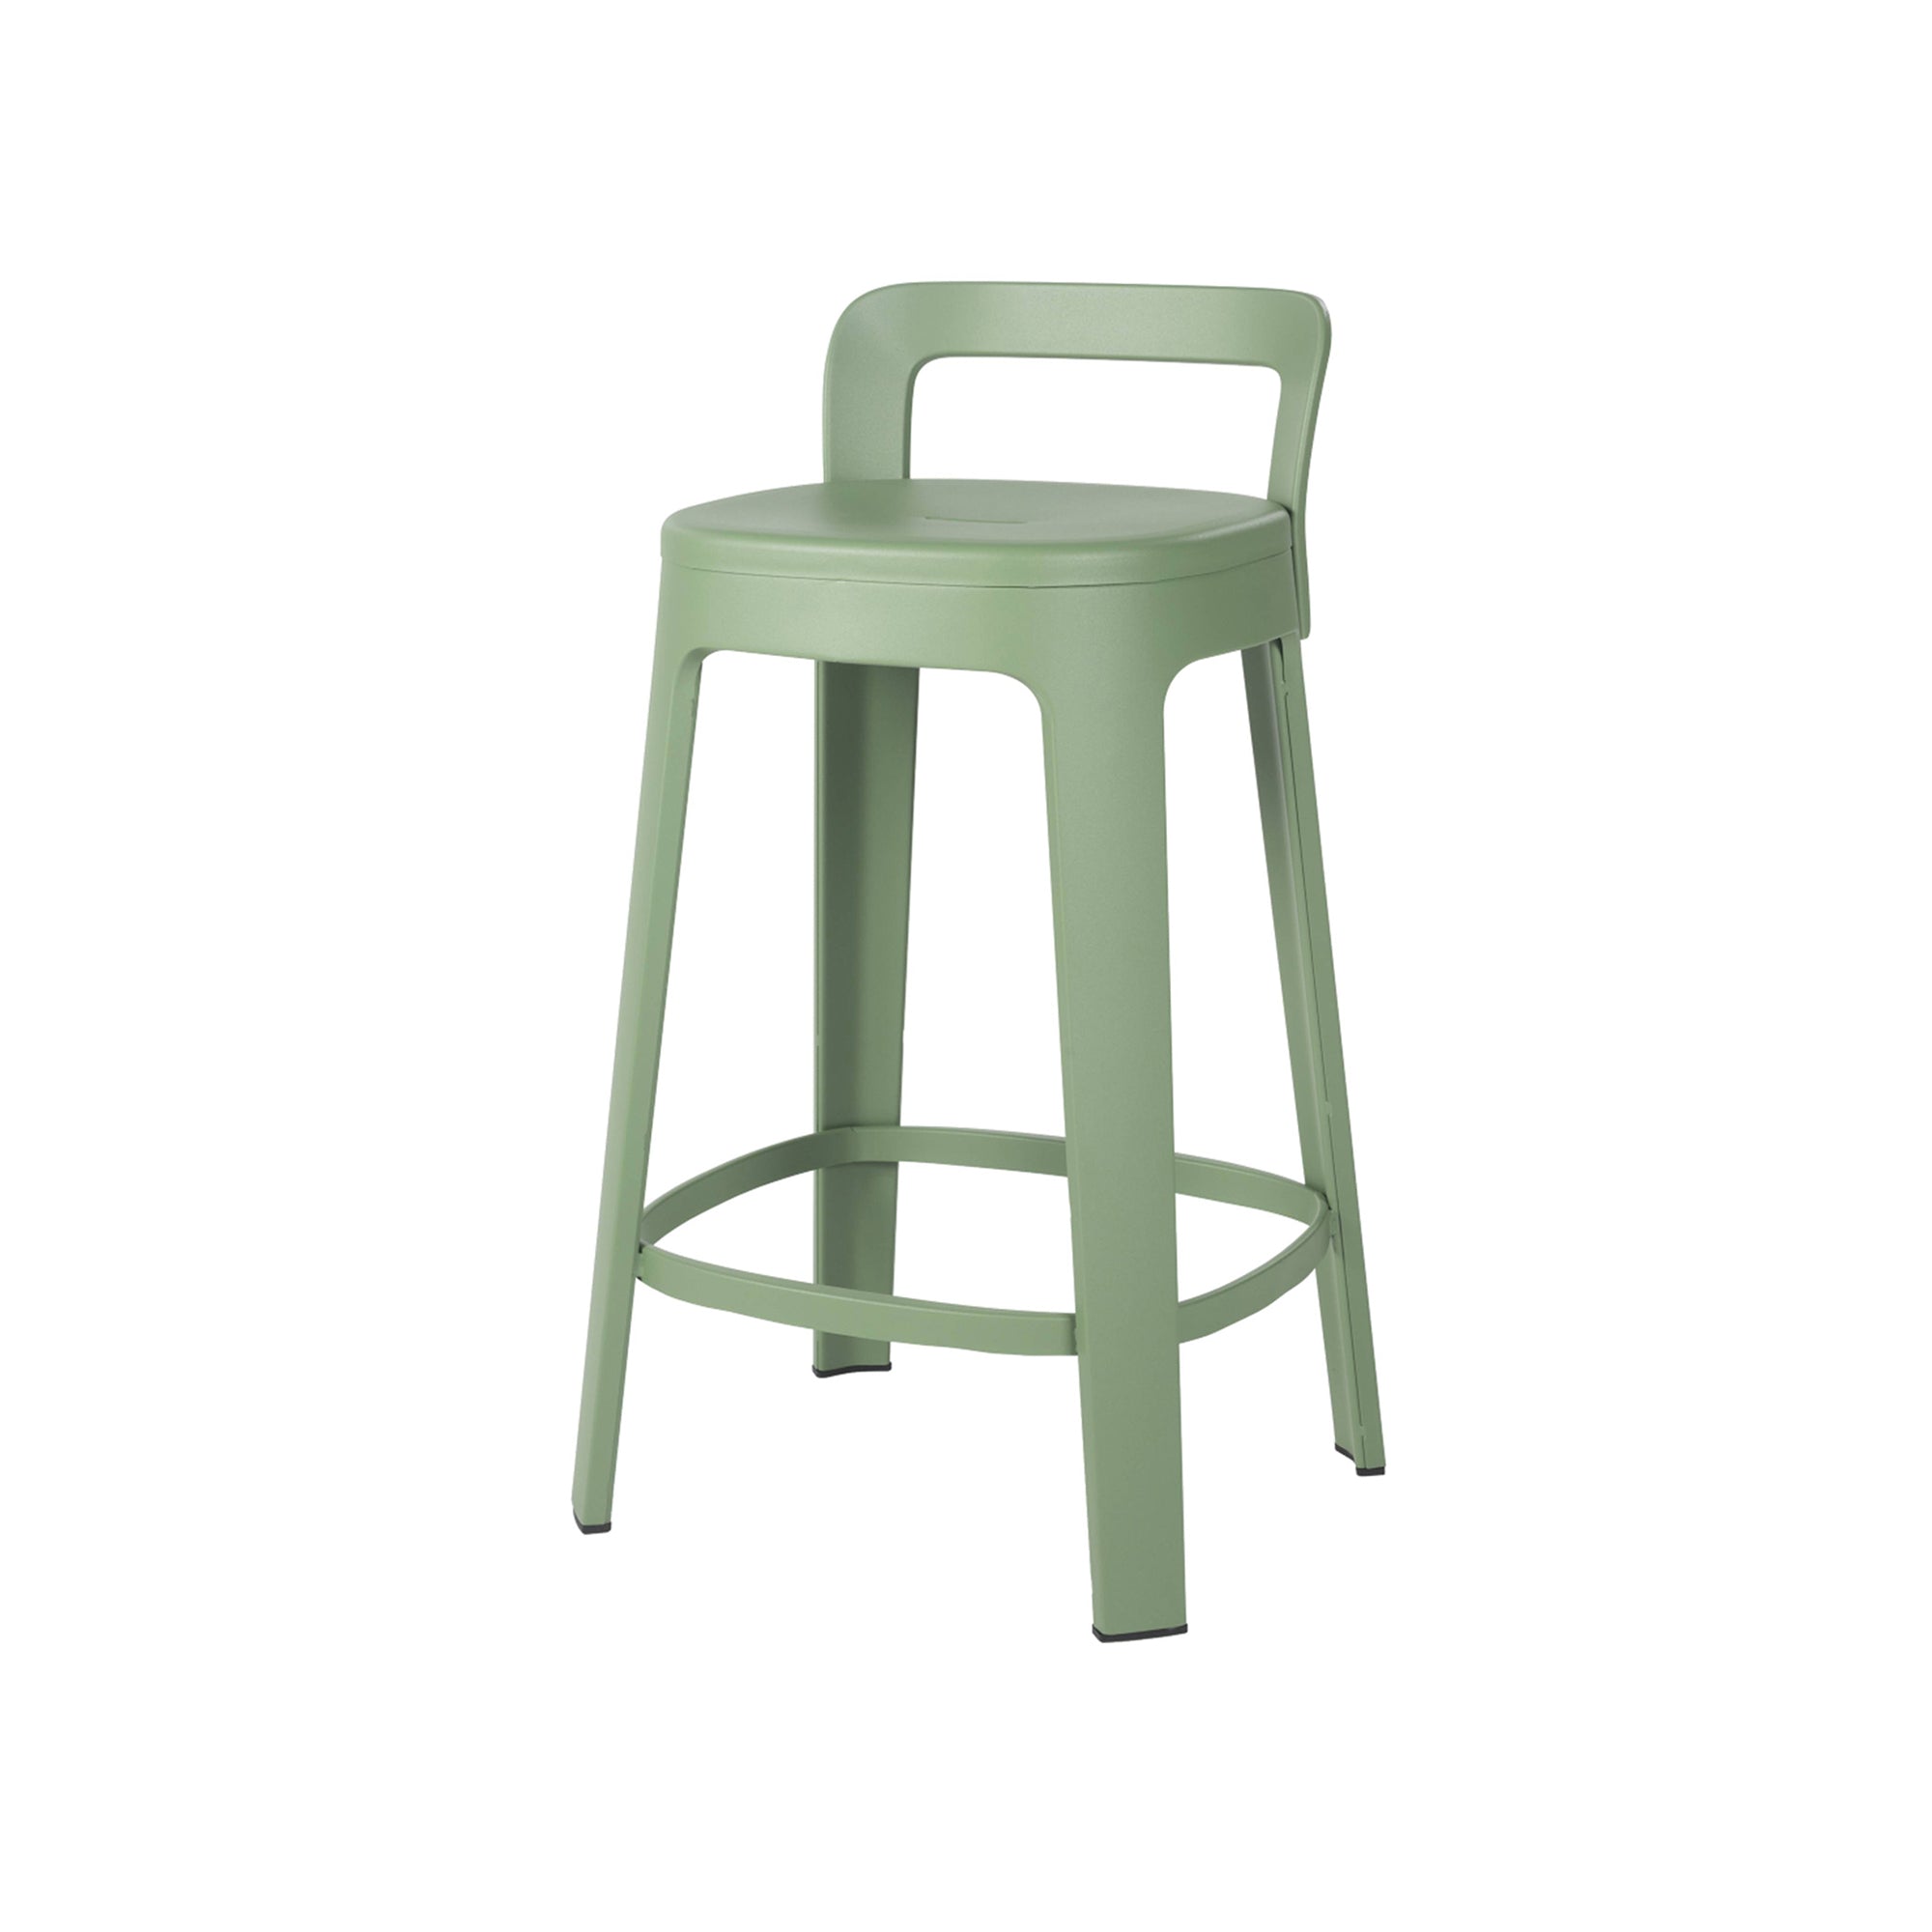 Ombra Bar + Counter Stool with Backrest: Counter + Green